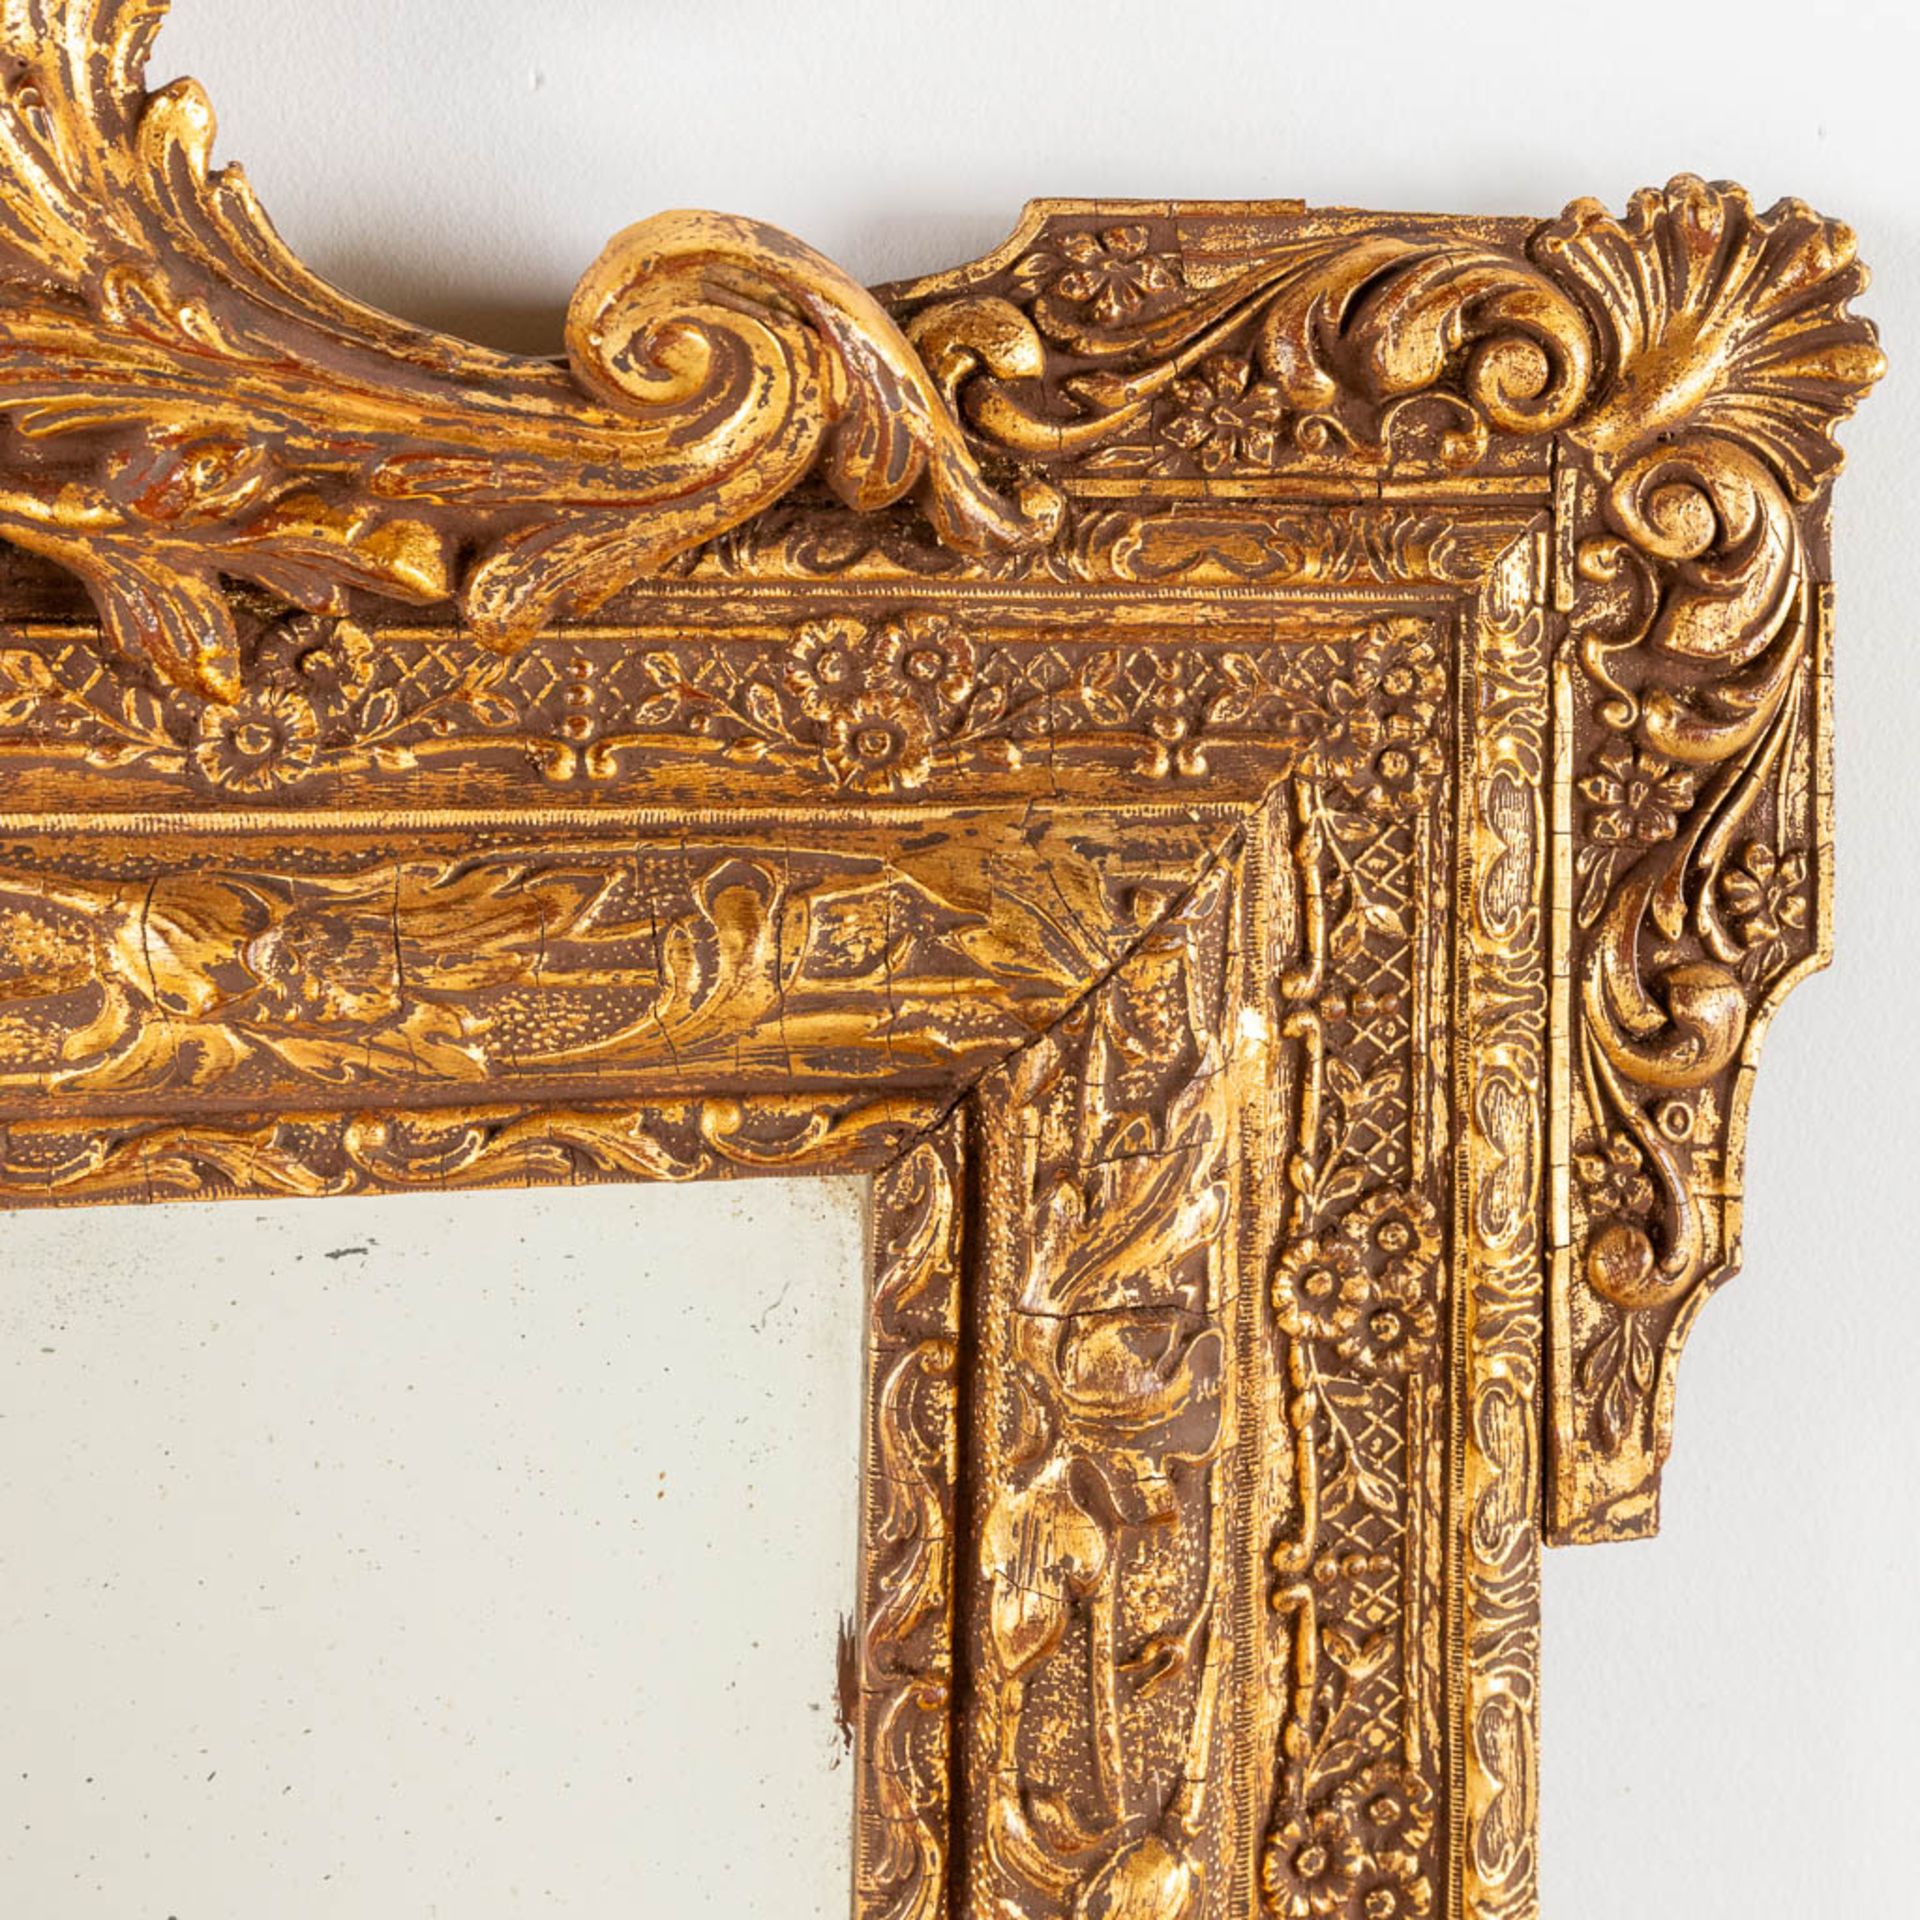 A mirror, sculptured wood and gilt stucco. Circa 1900. (W:135 x H:85 cm) - Image 4 of 8